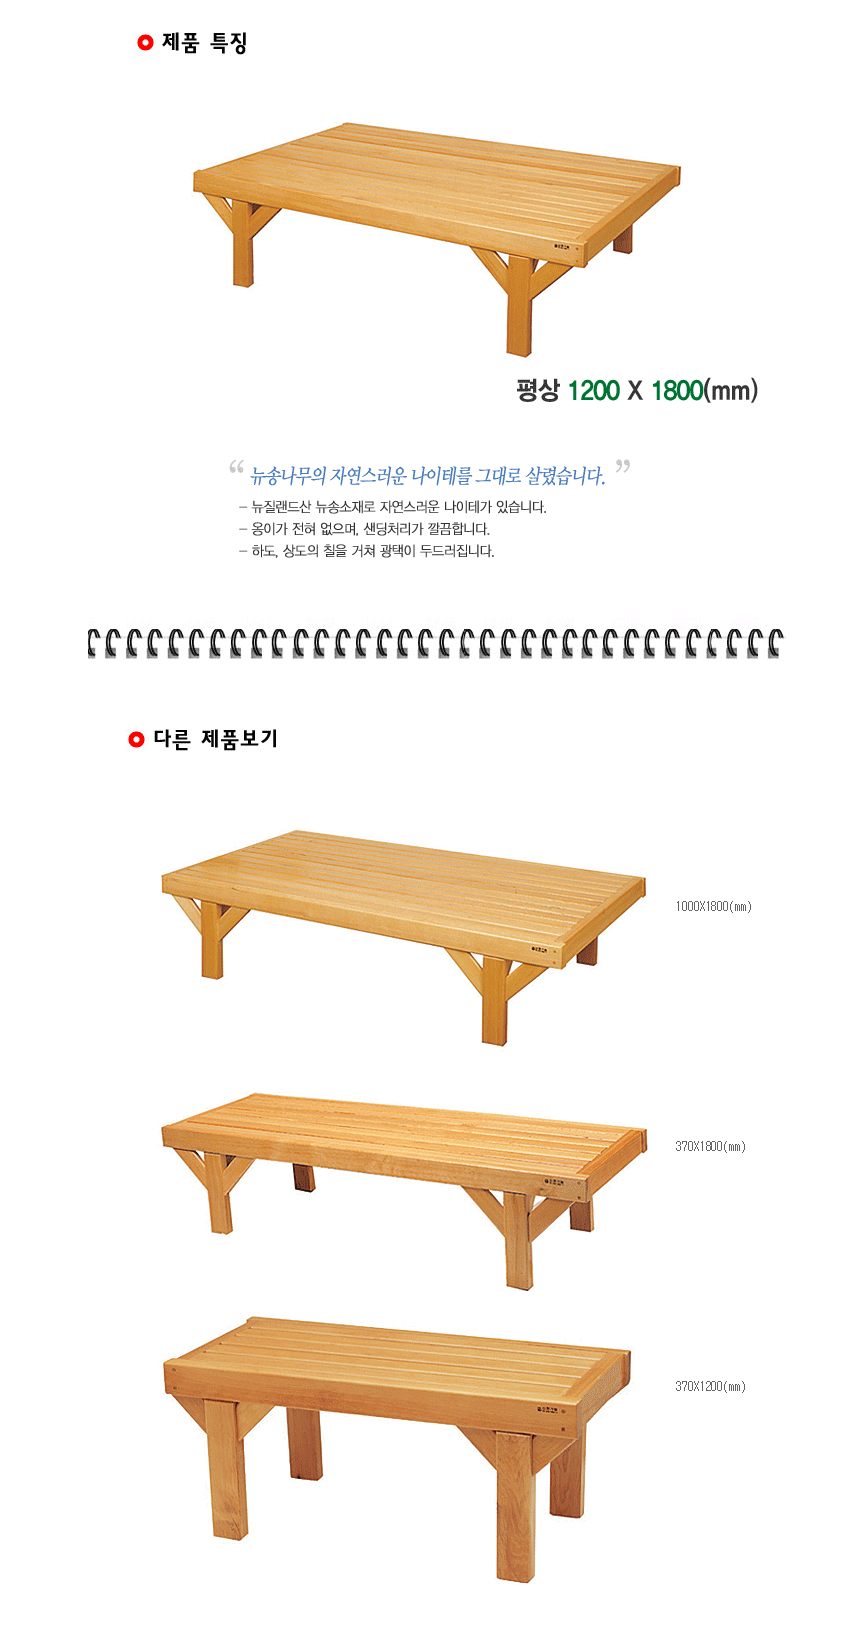 wooden-bed_1200_1800-1.gif